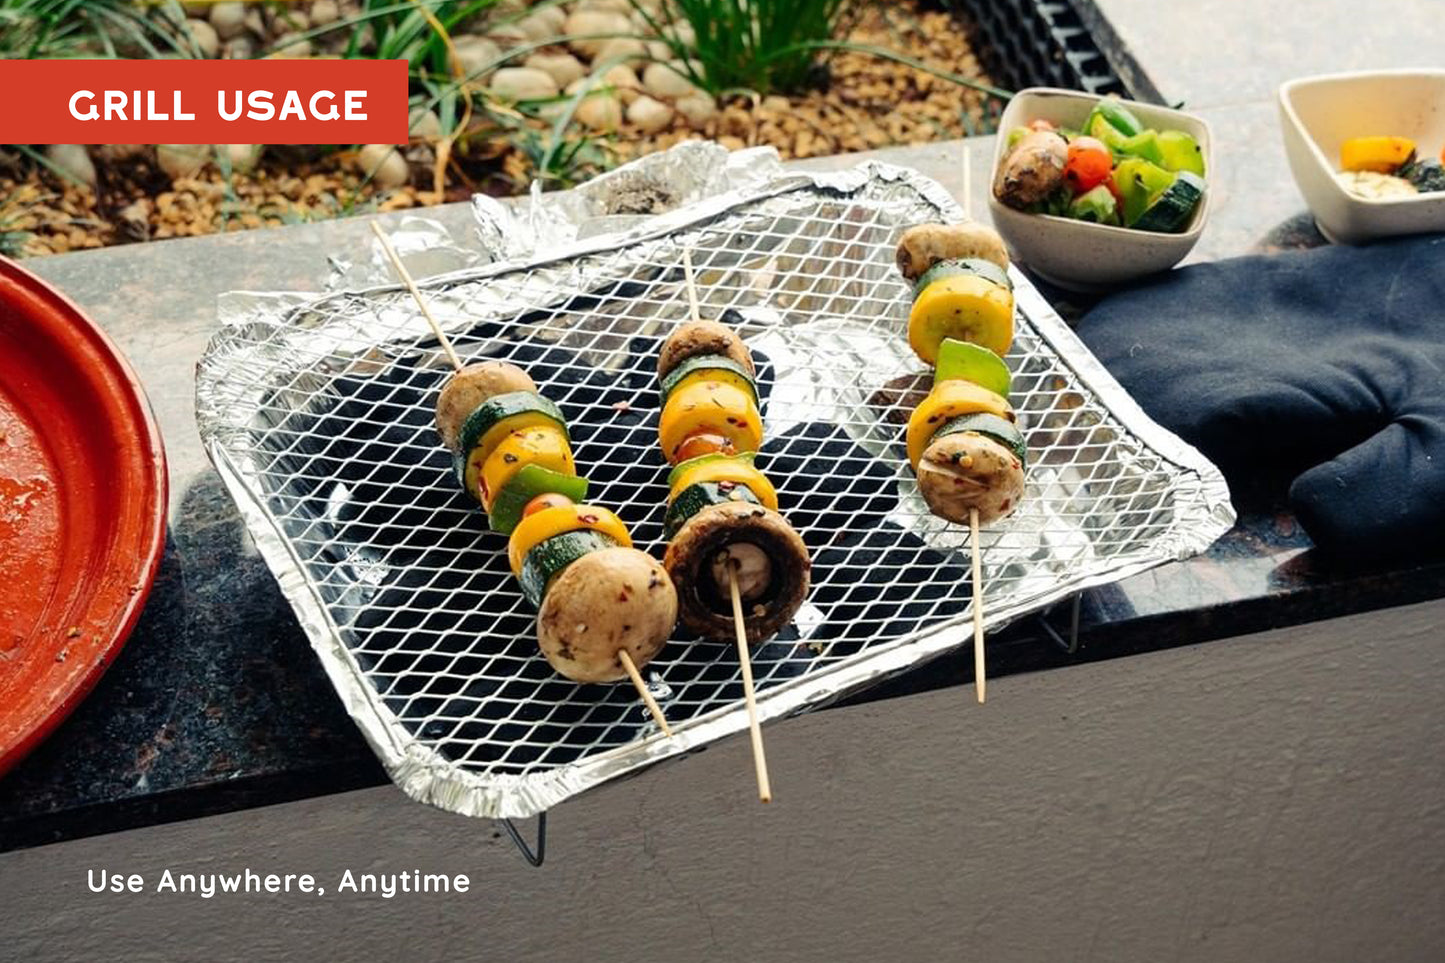 Lite Instant Grill